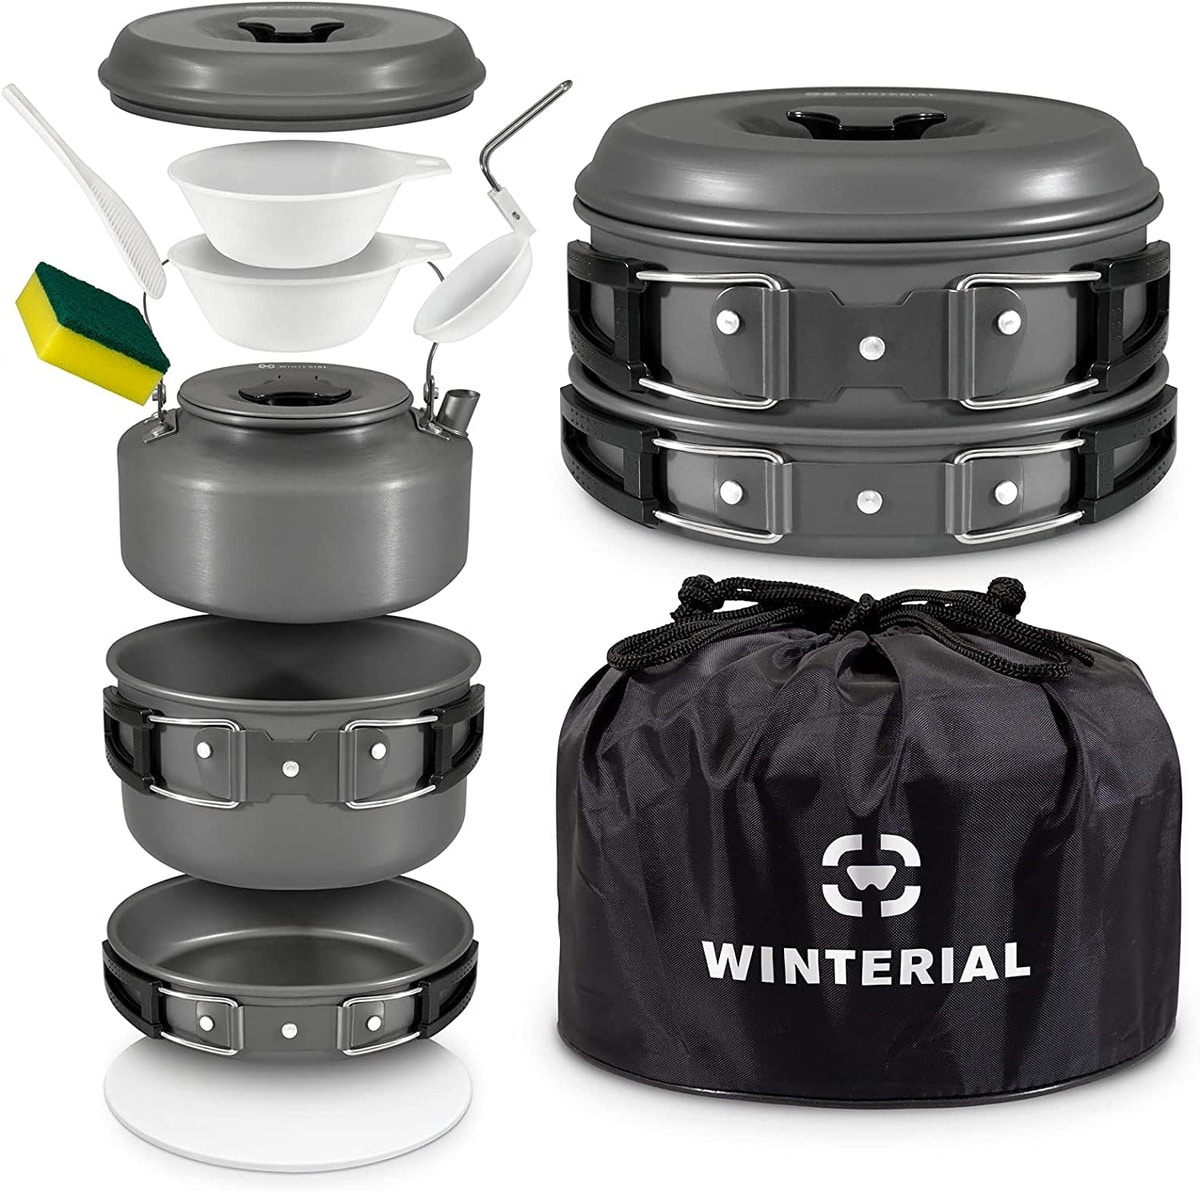 winterial camping cooking set